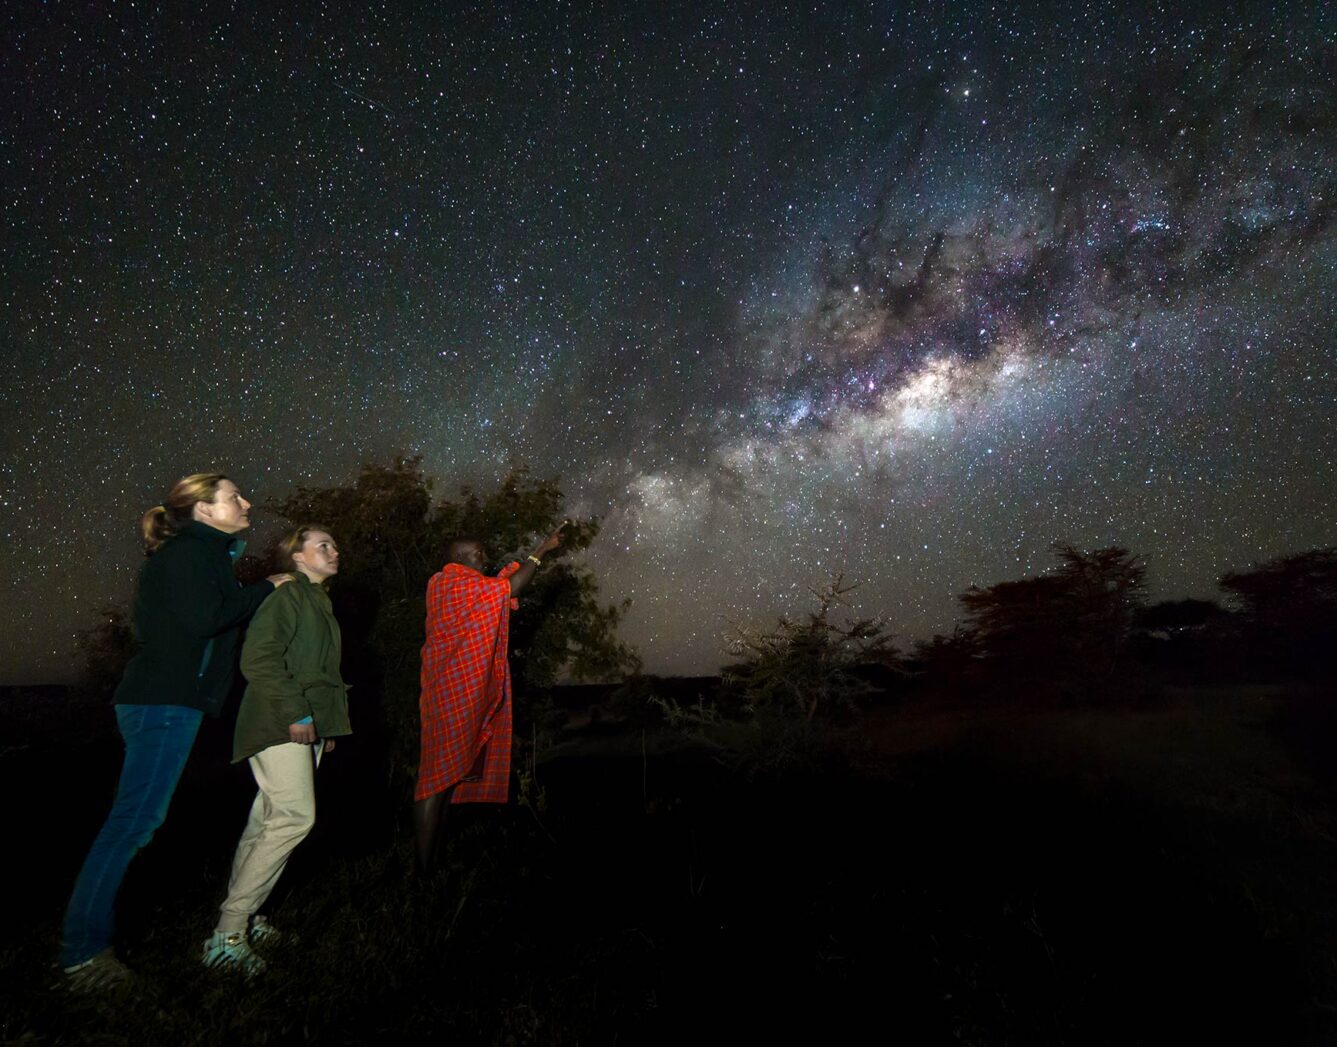 A man shows guests the milkyway